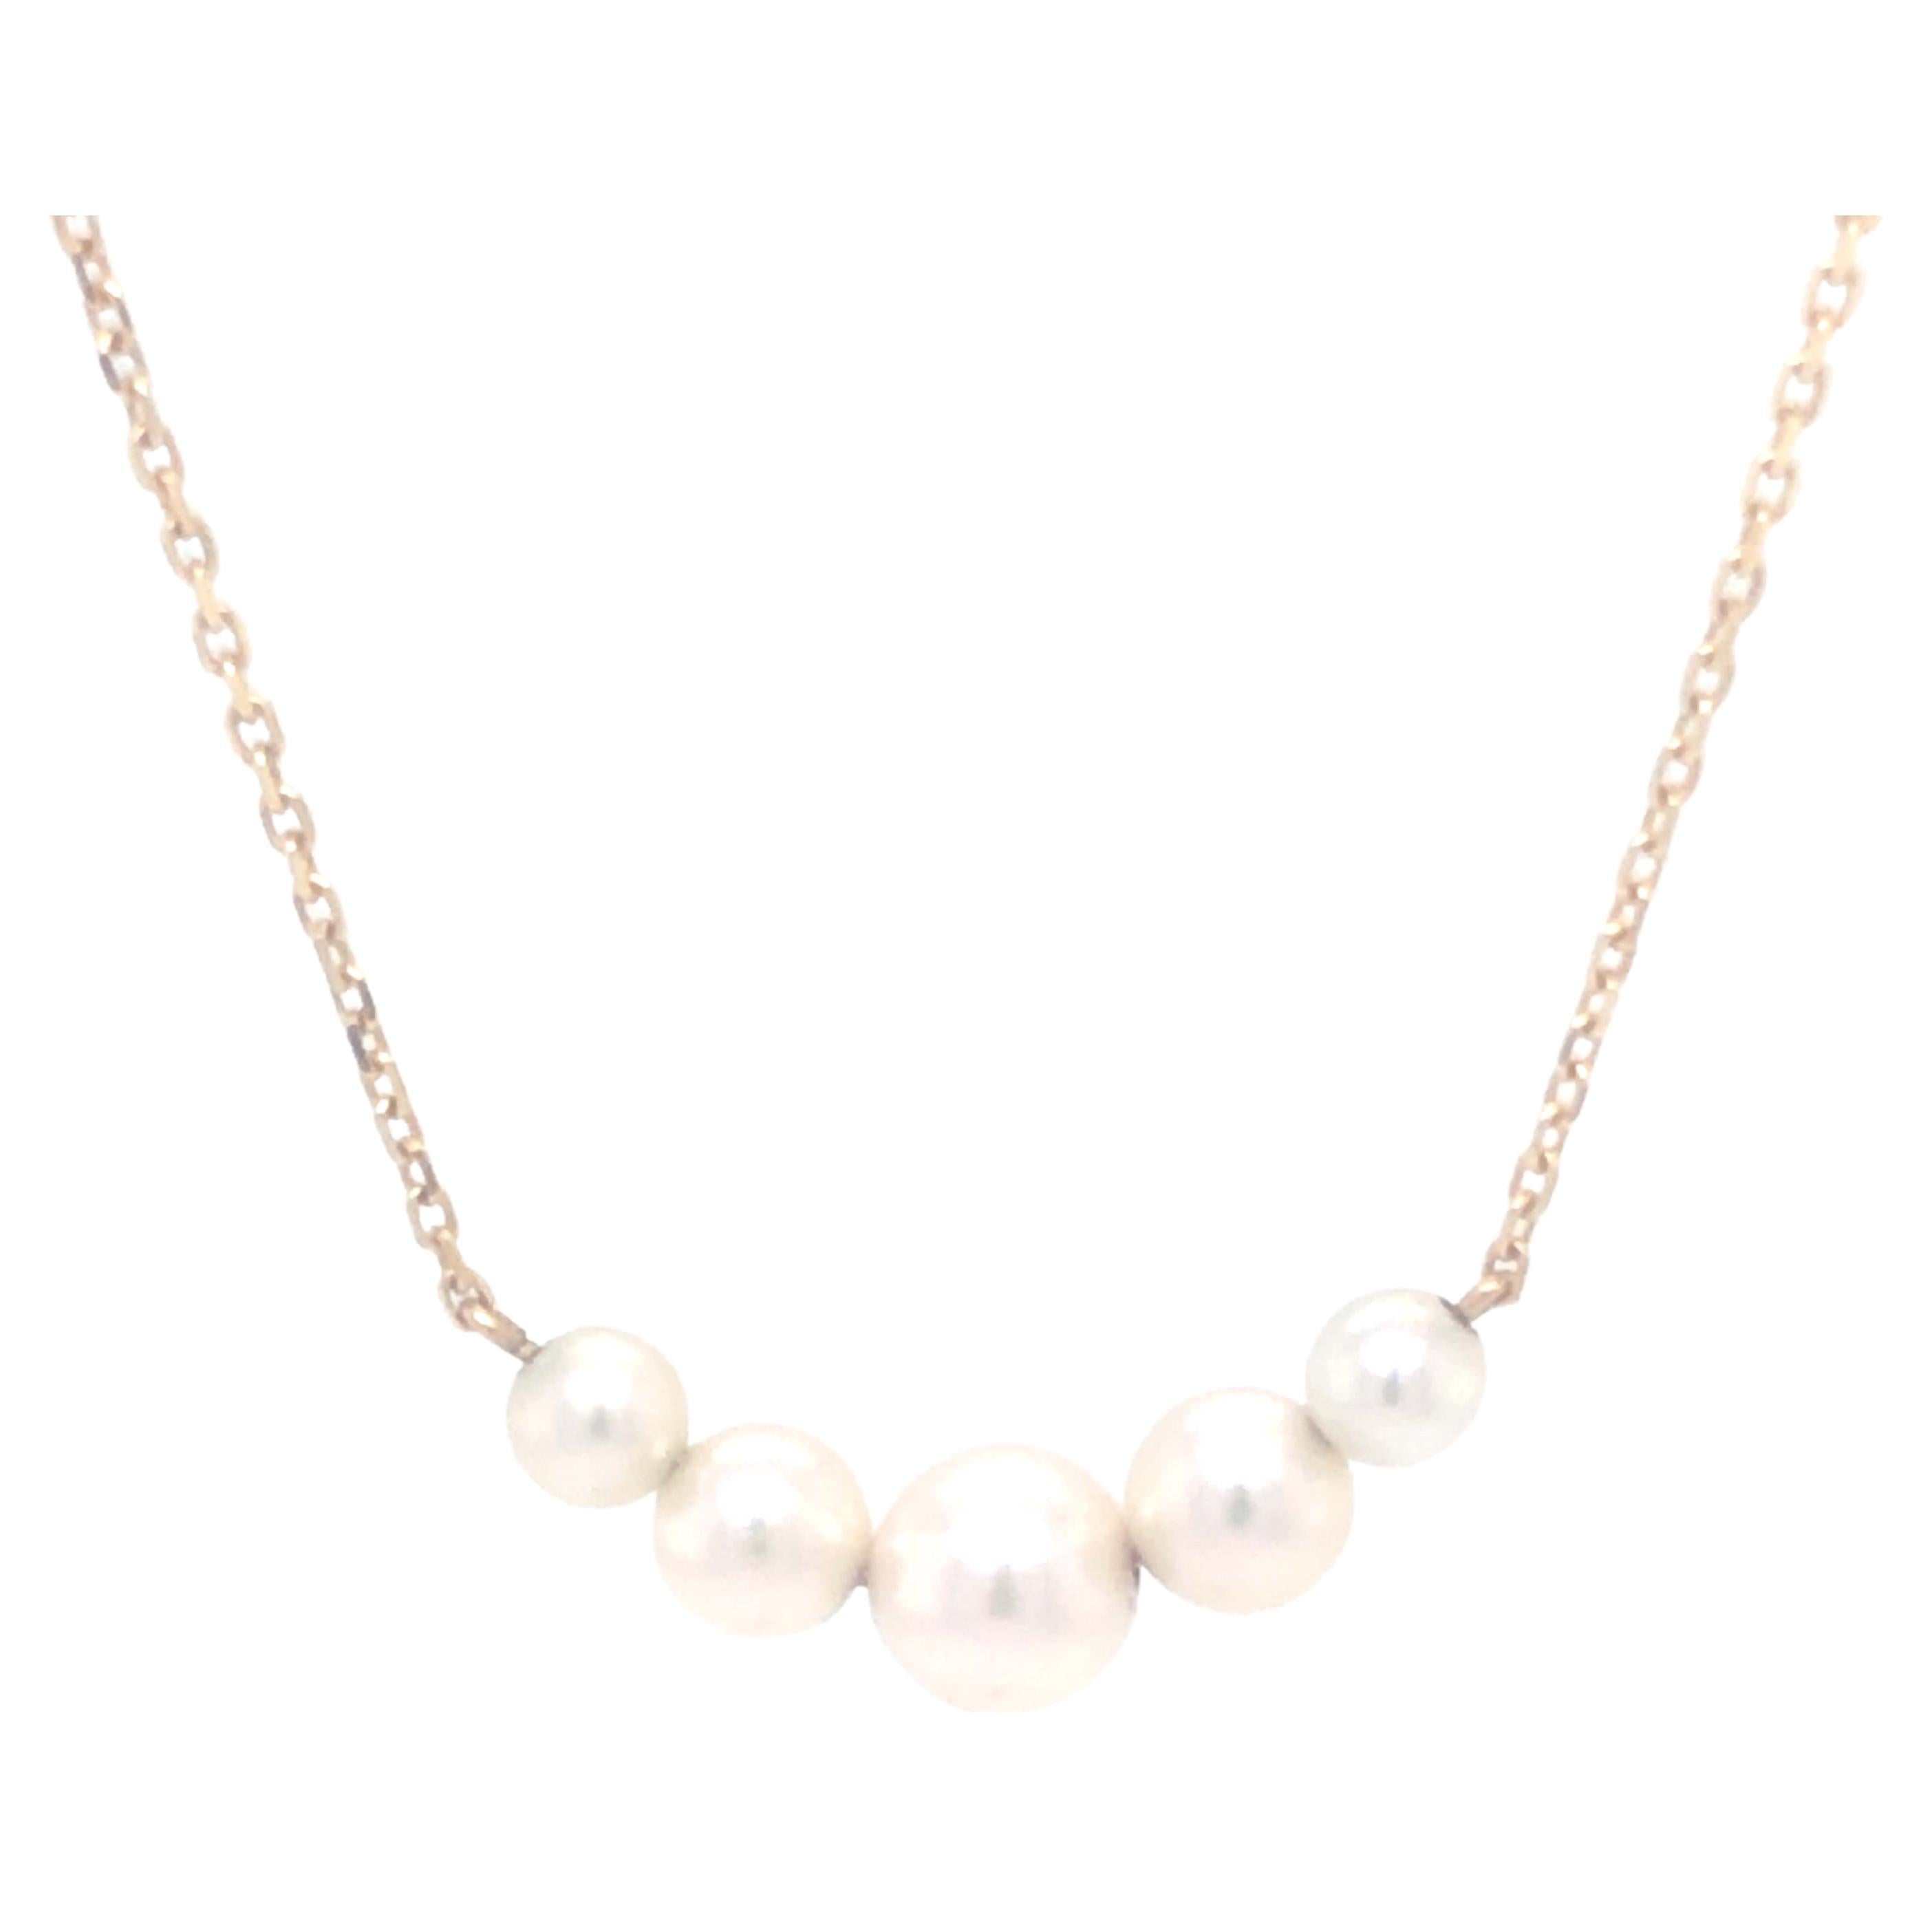 Mikimoto 5 Pearl Necklace in 14k Yellow Gold